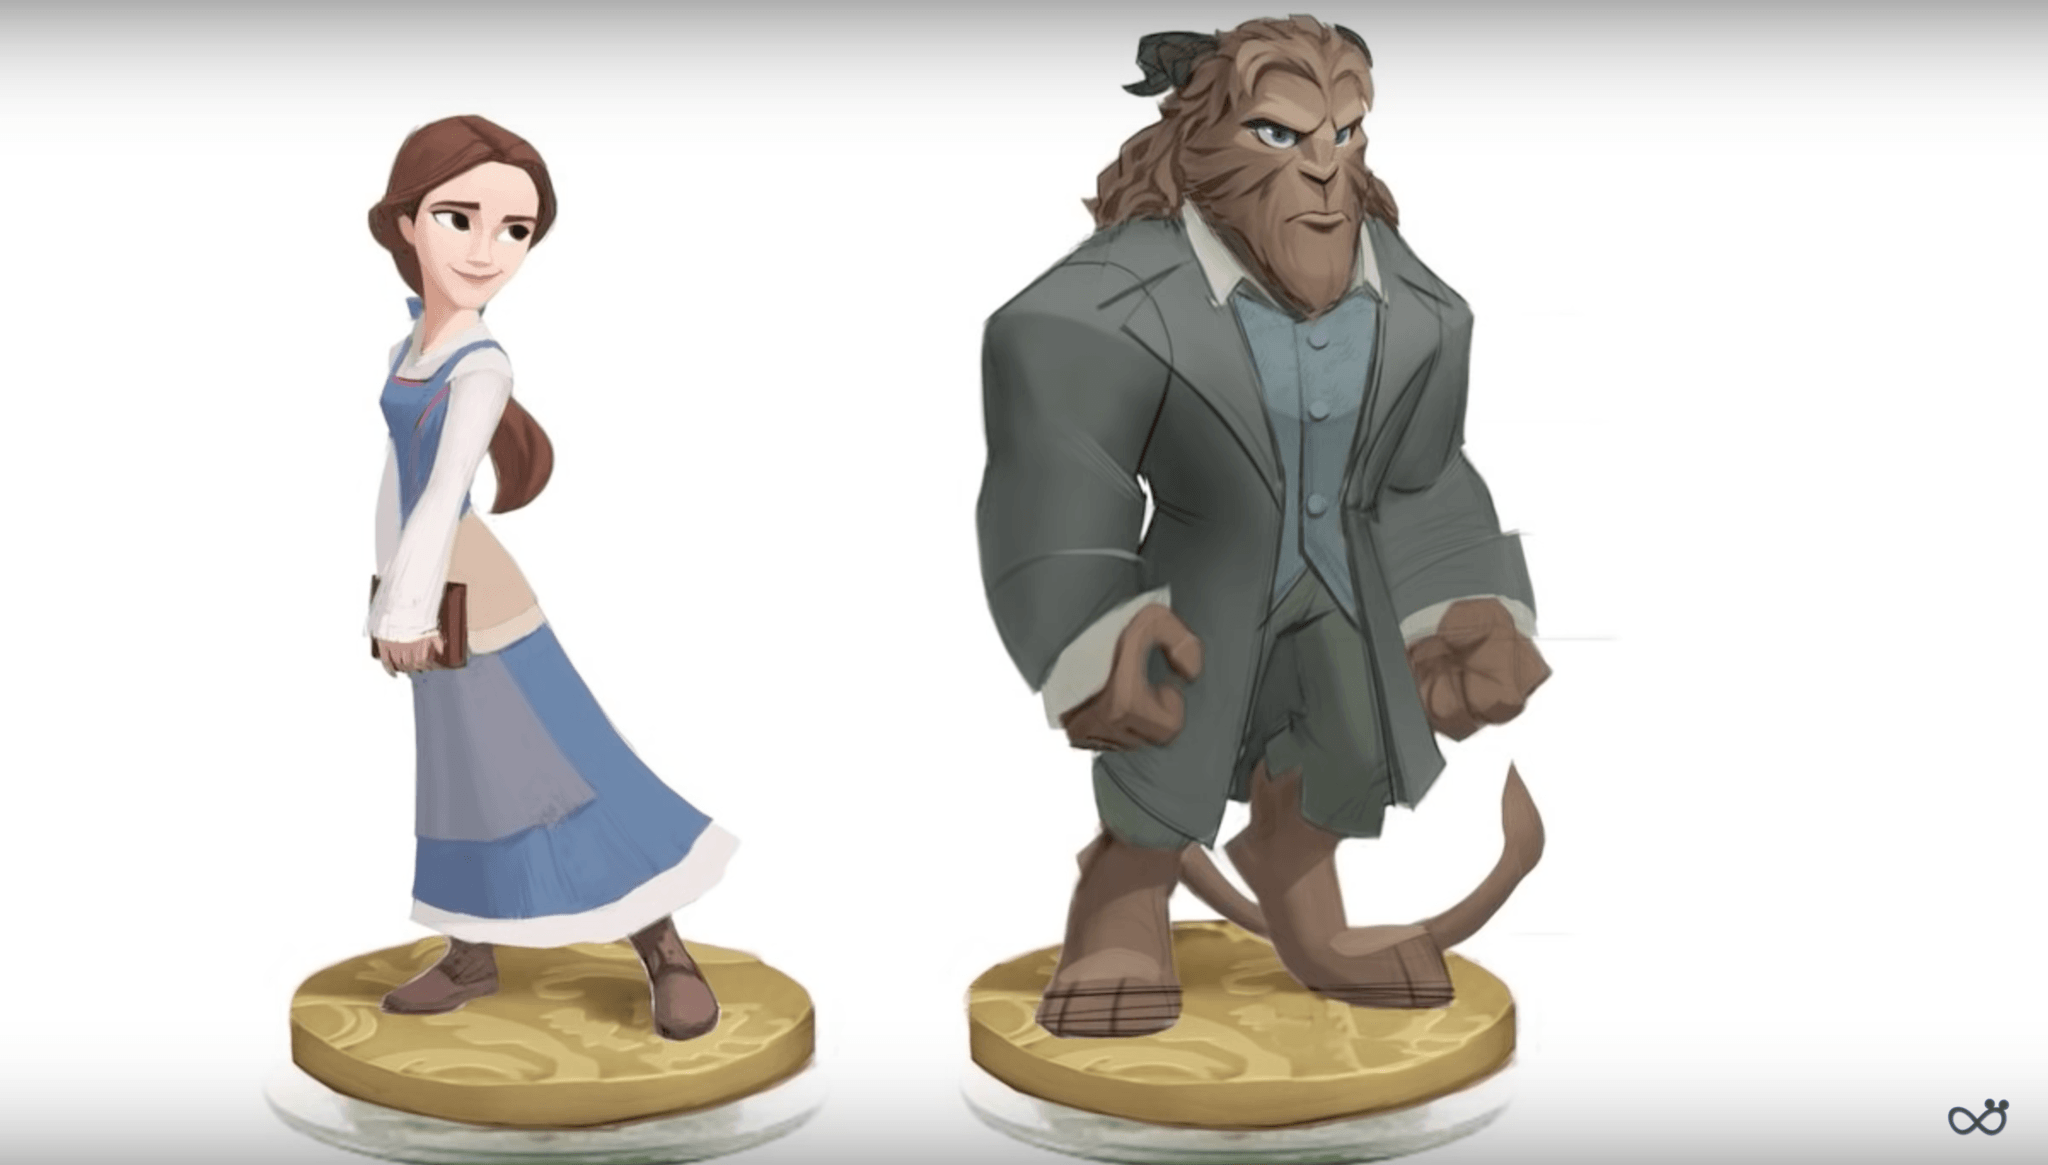 Cancelled Beauty and the Beast Disney Infinity Figures Revealed